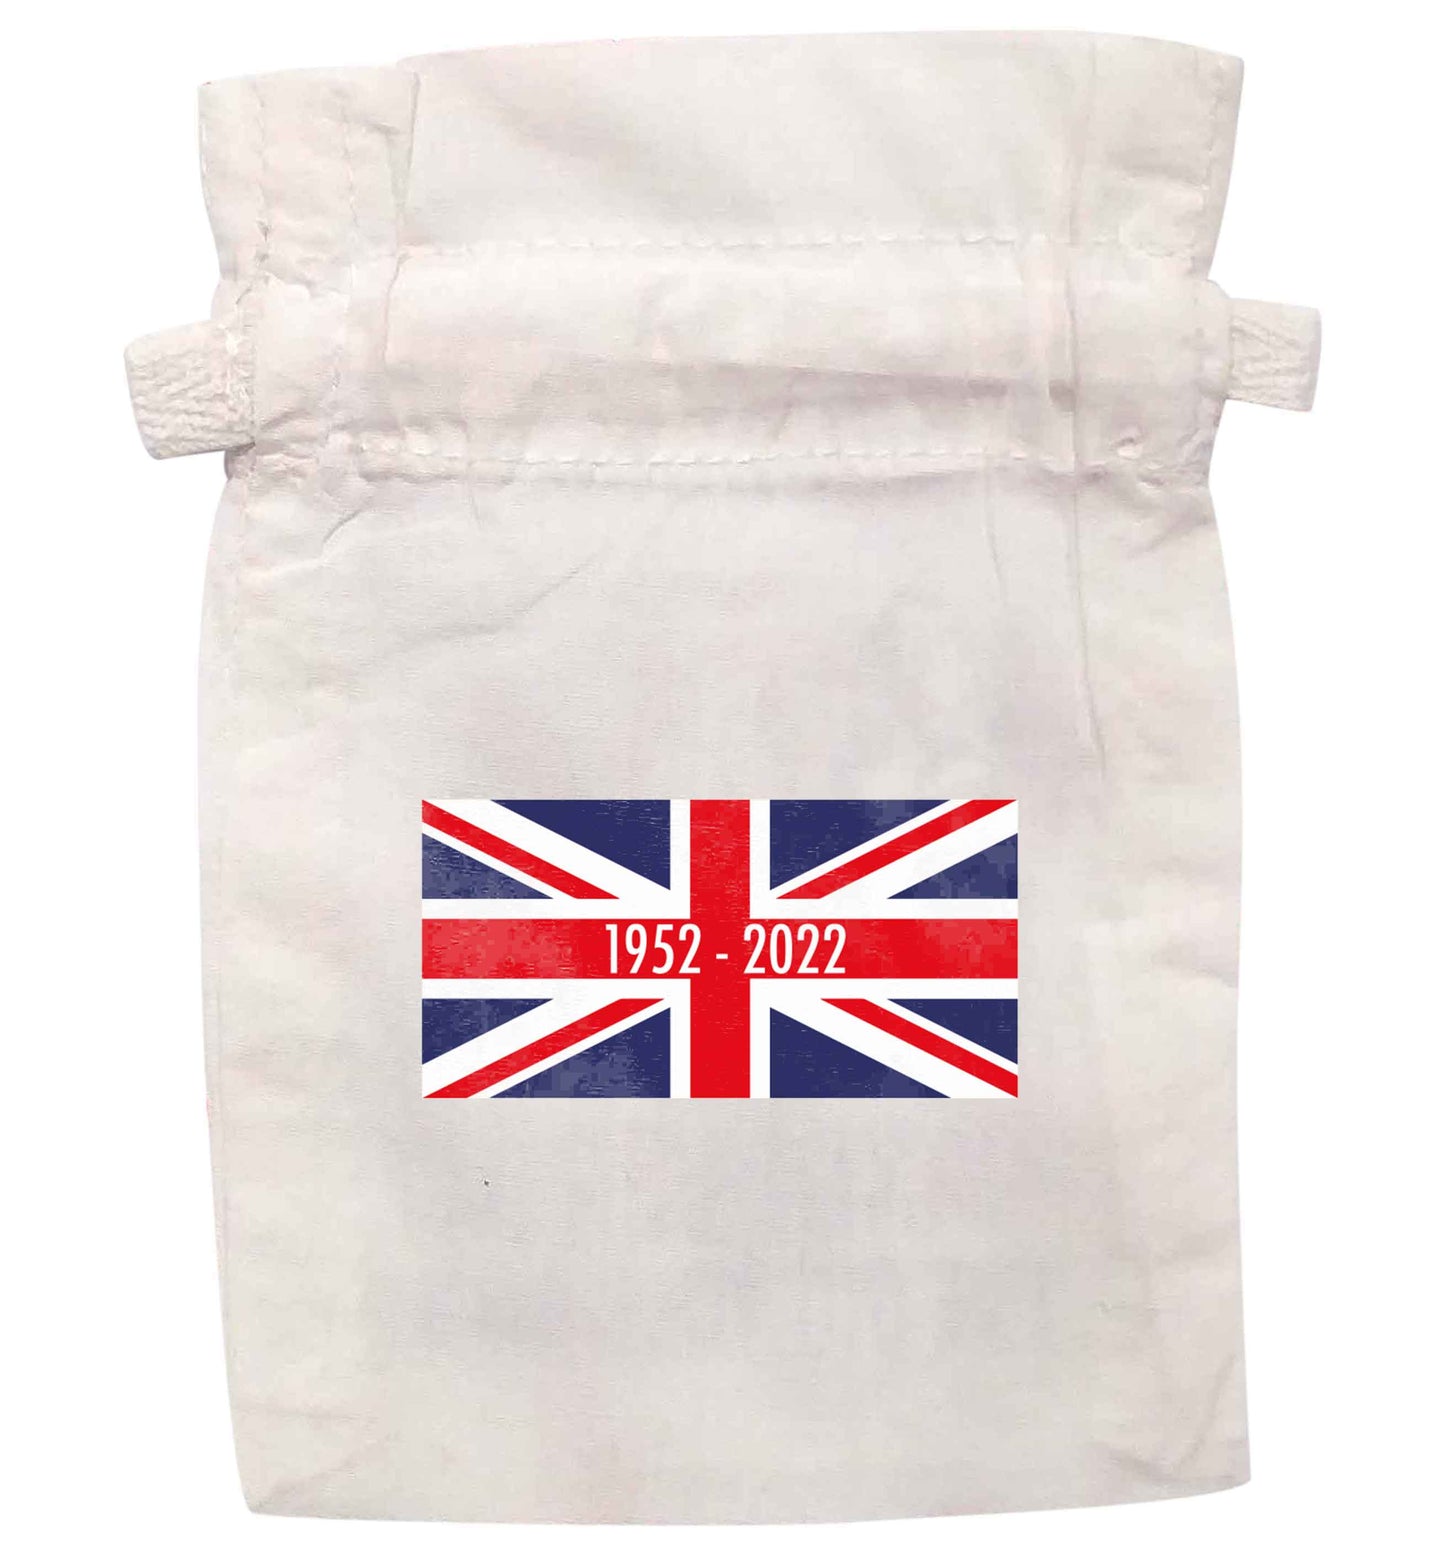 British flag Queens jubilee | XS - L | Pouch / Drawstring bag / Sack | Organic Cotton | Bulk discounts available!